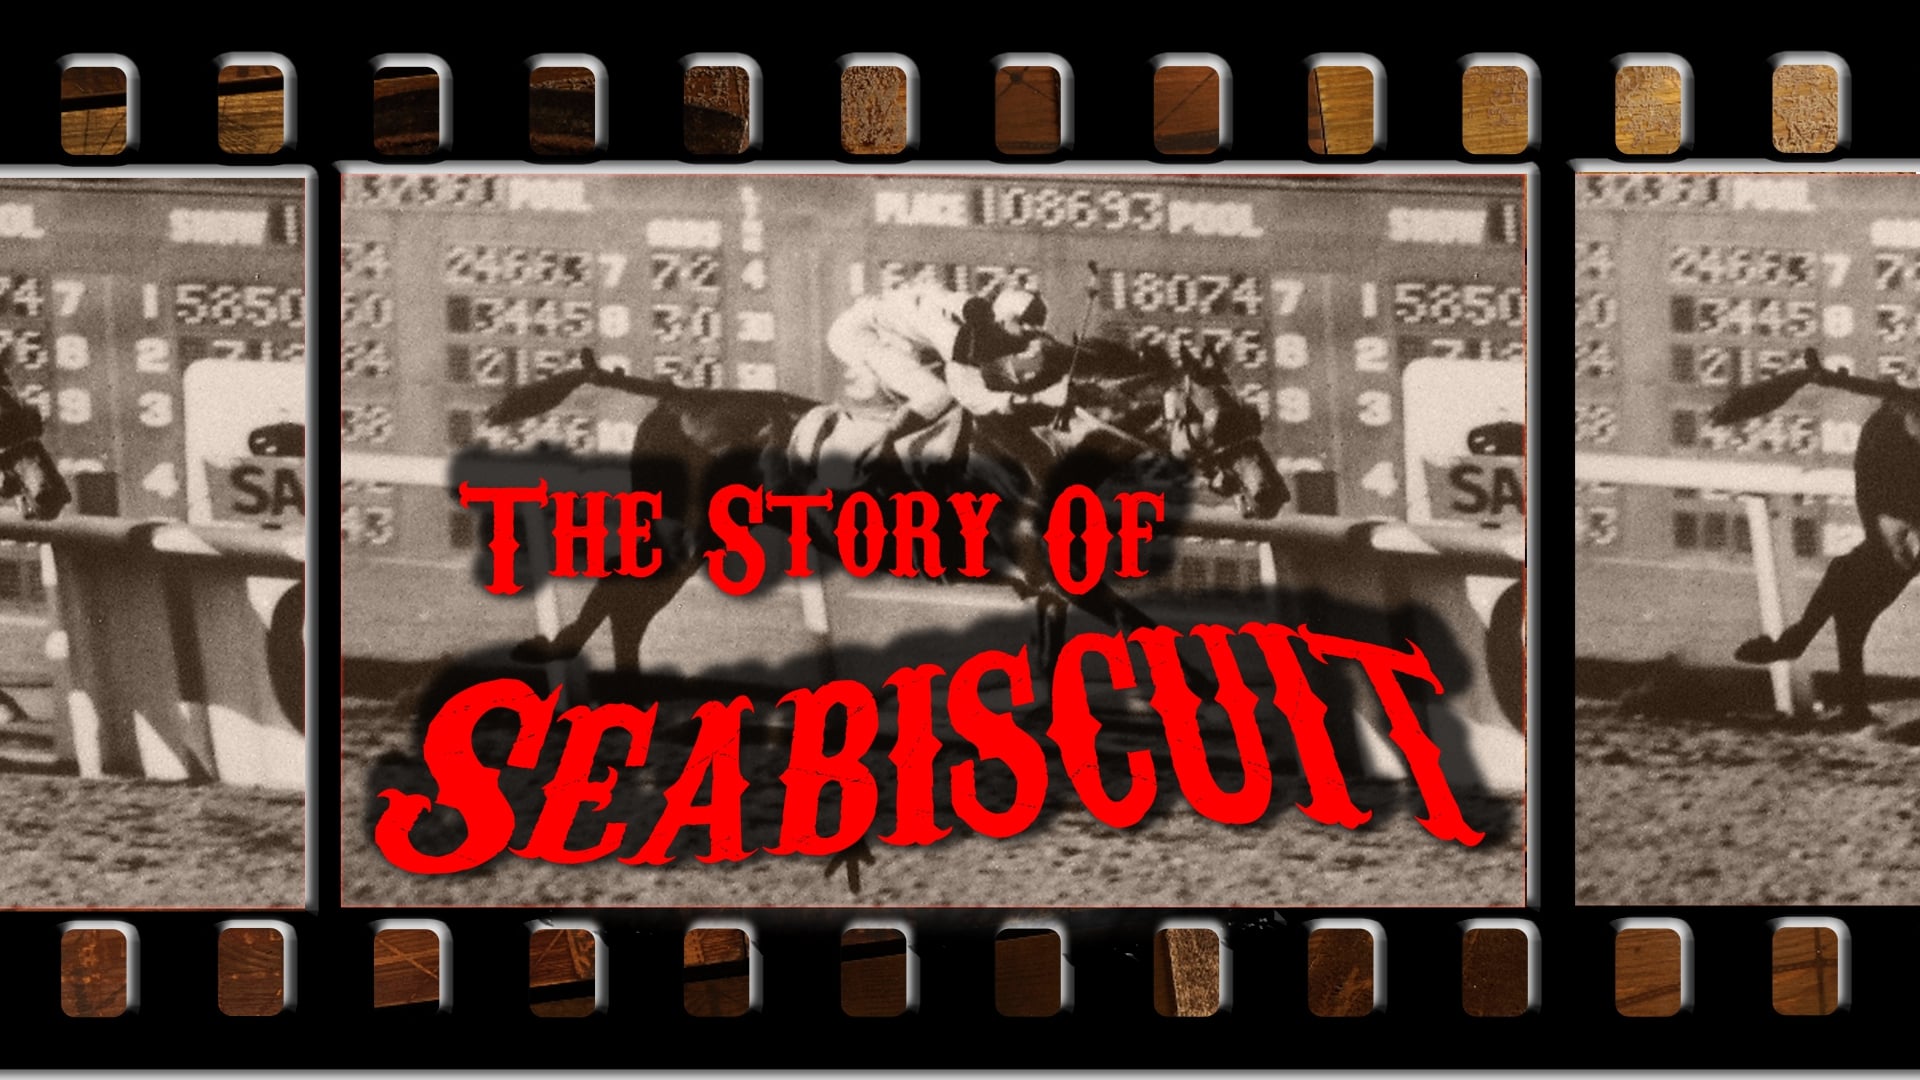 The Story Of Seabiscuit